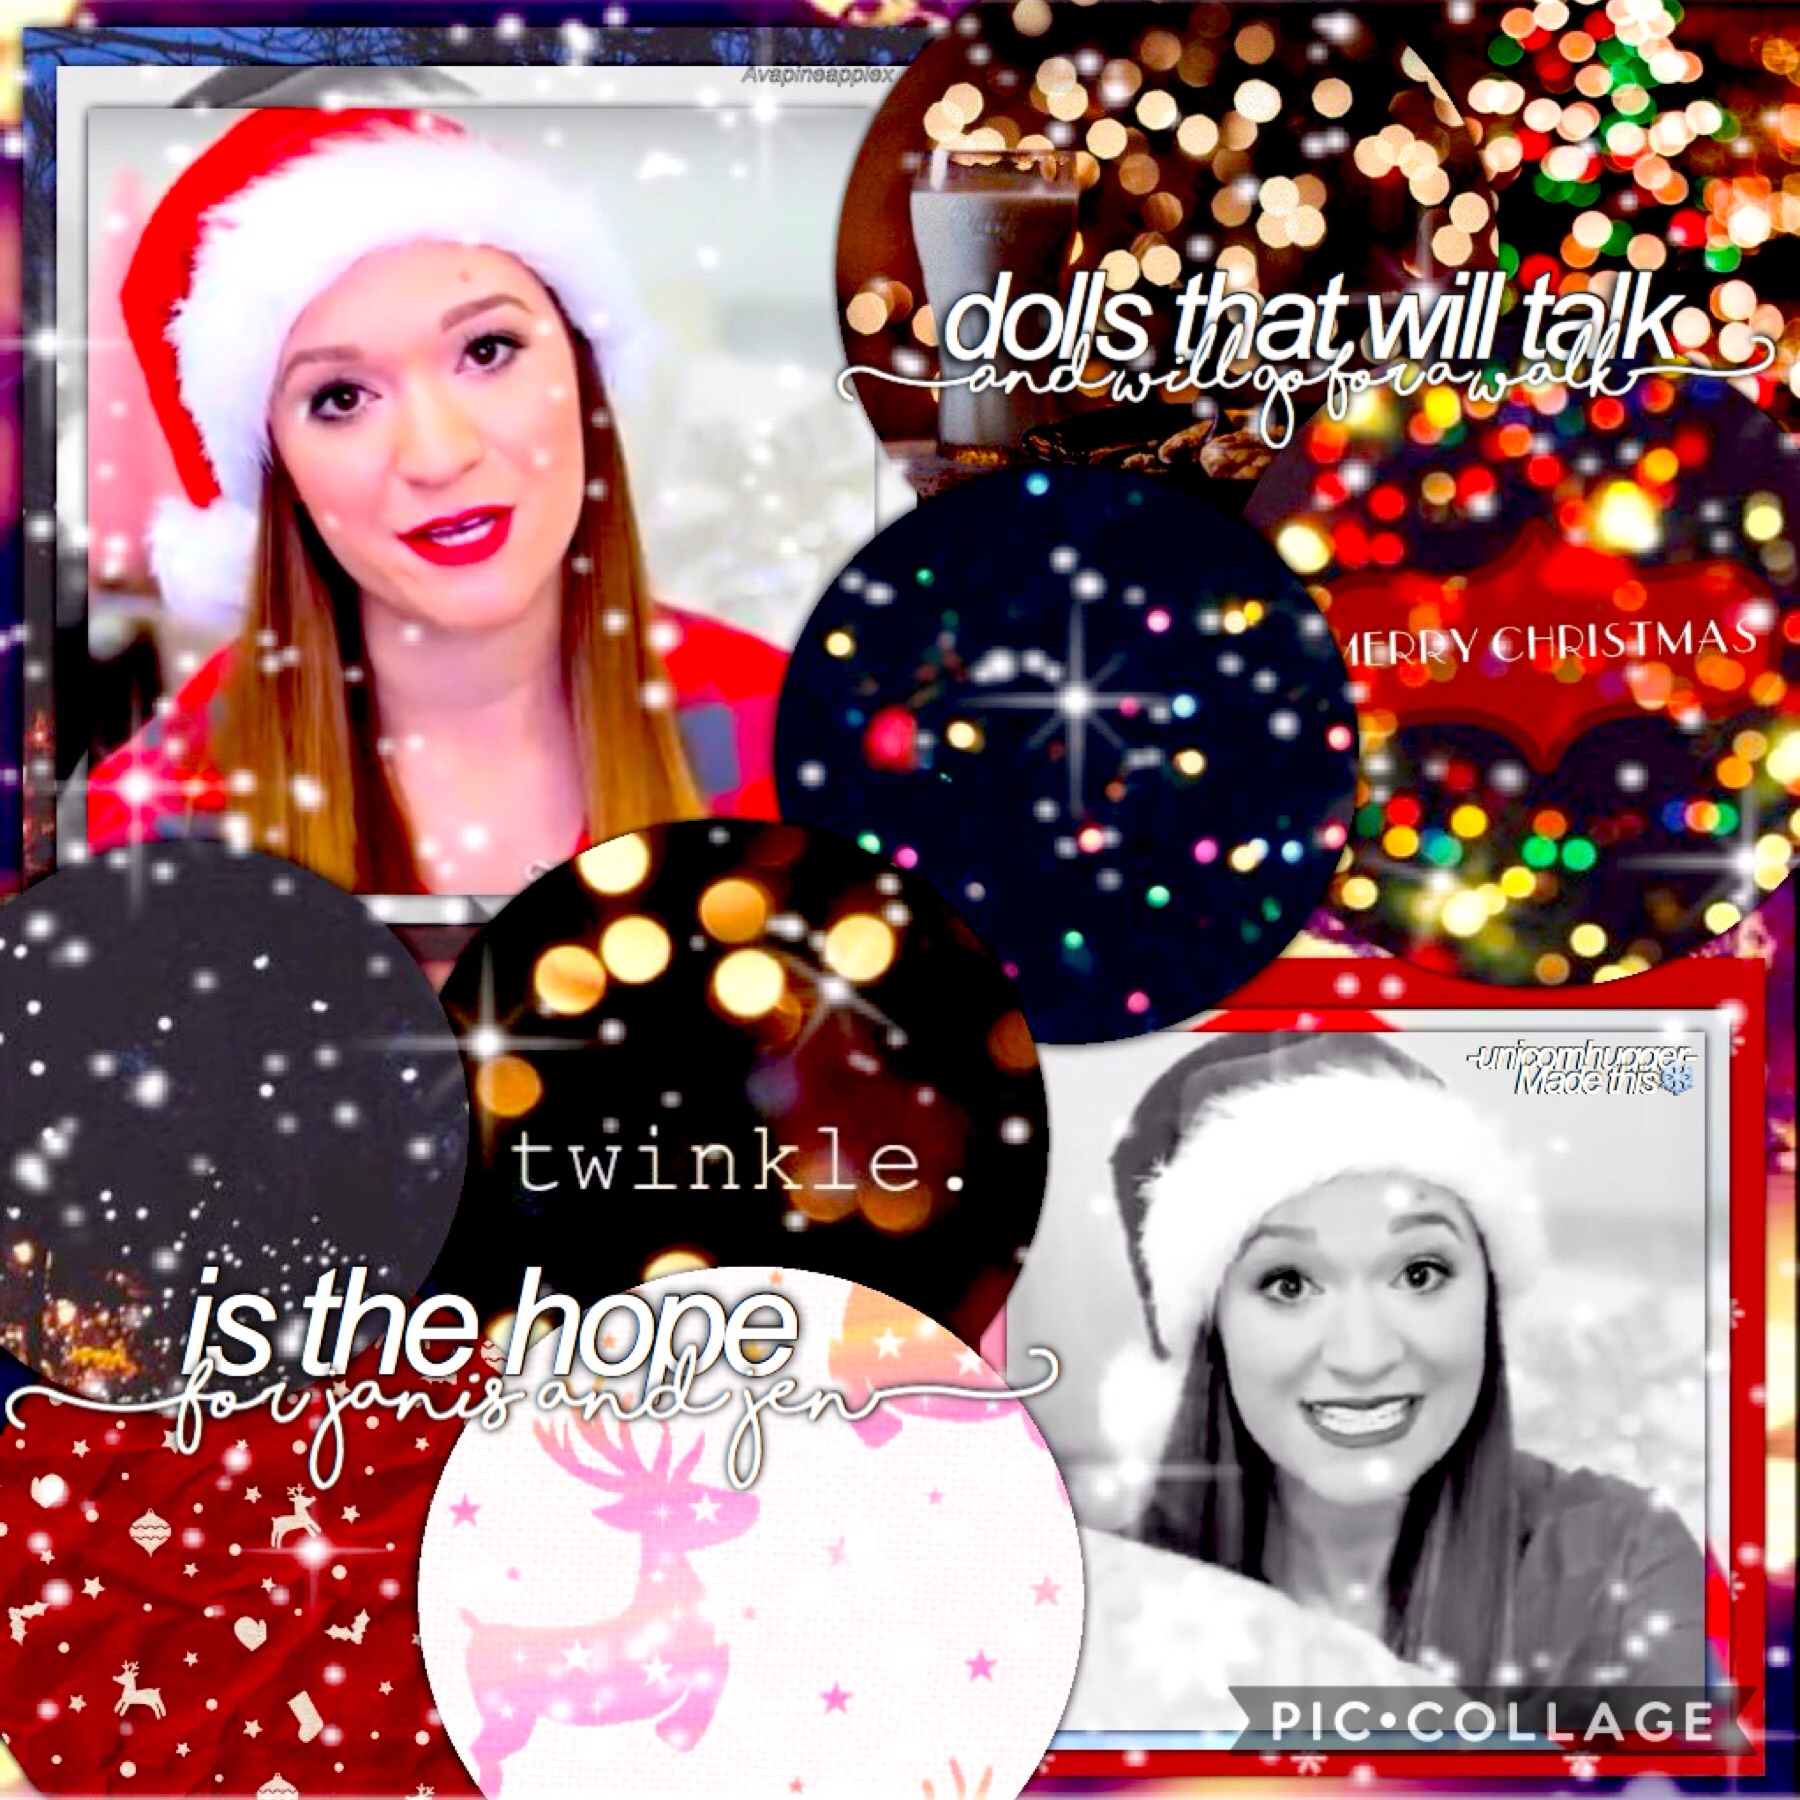 hi guys! This is the last post of my theme😭christmas is over! i didnt post very much on this theme i didnt want to be on my ipad all the time making edit things when my family was here to visit! well i hope you enjoyed my theme anyway, bye!